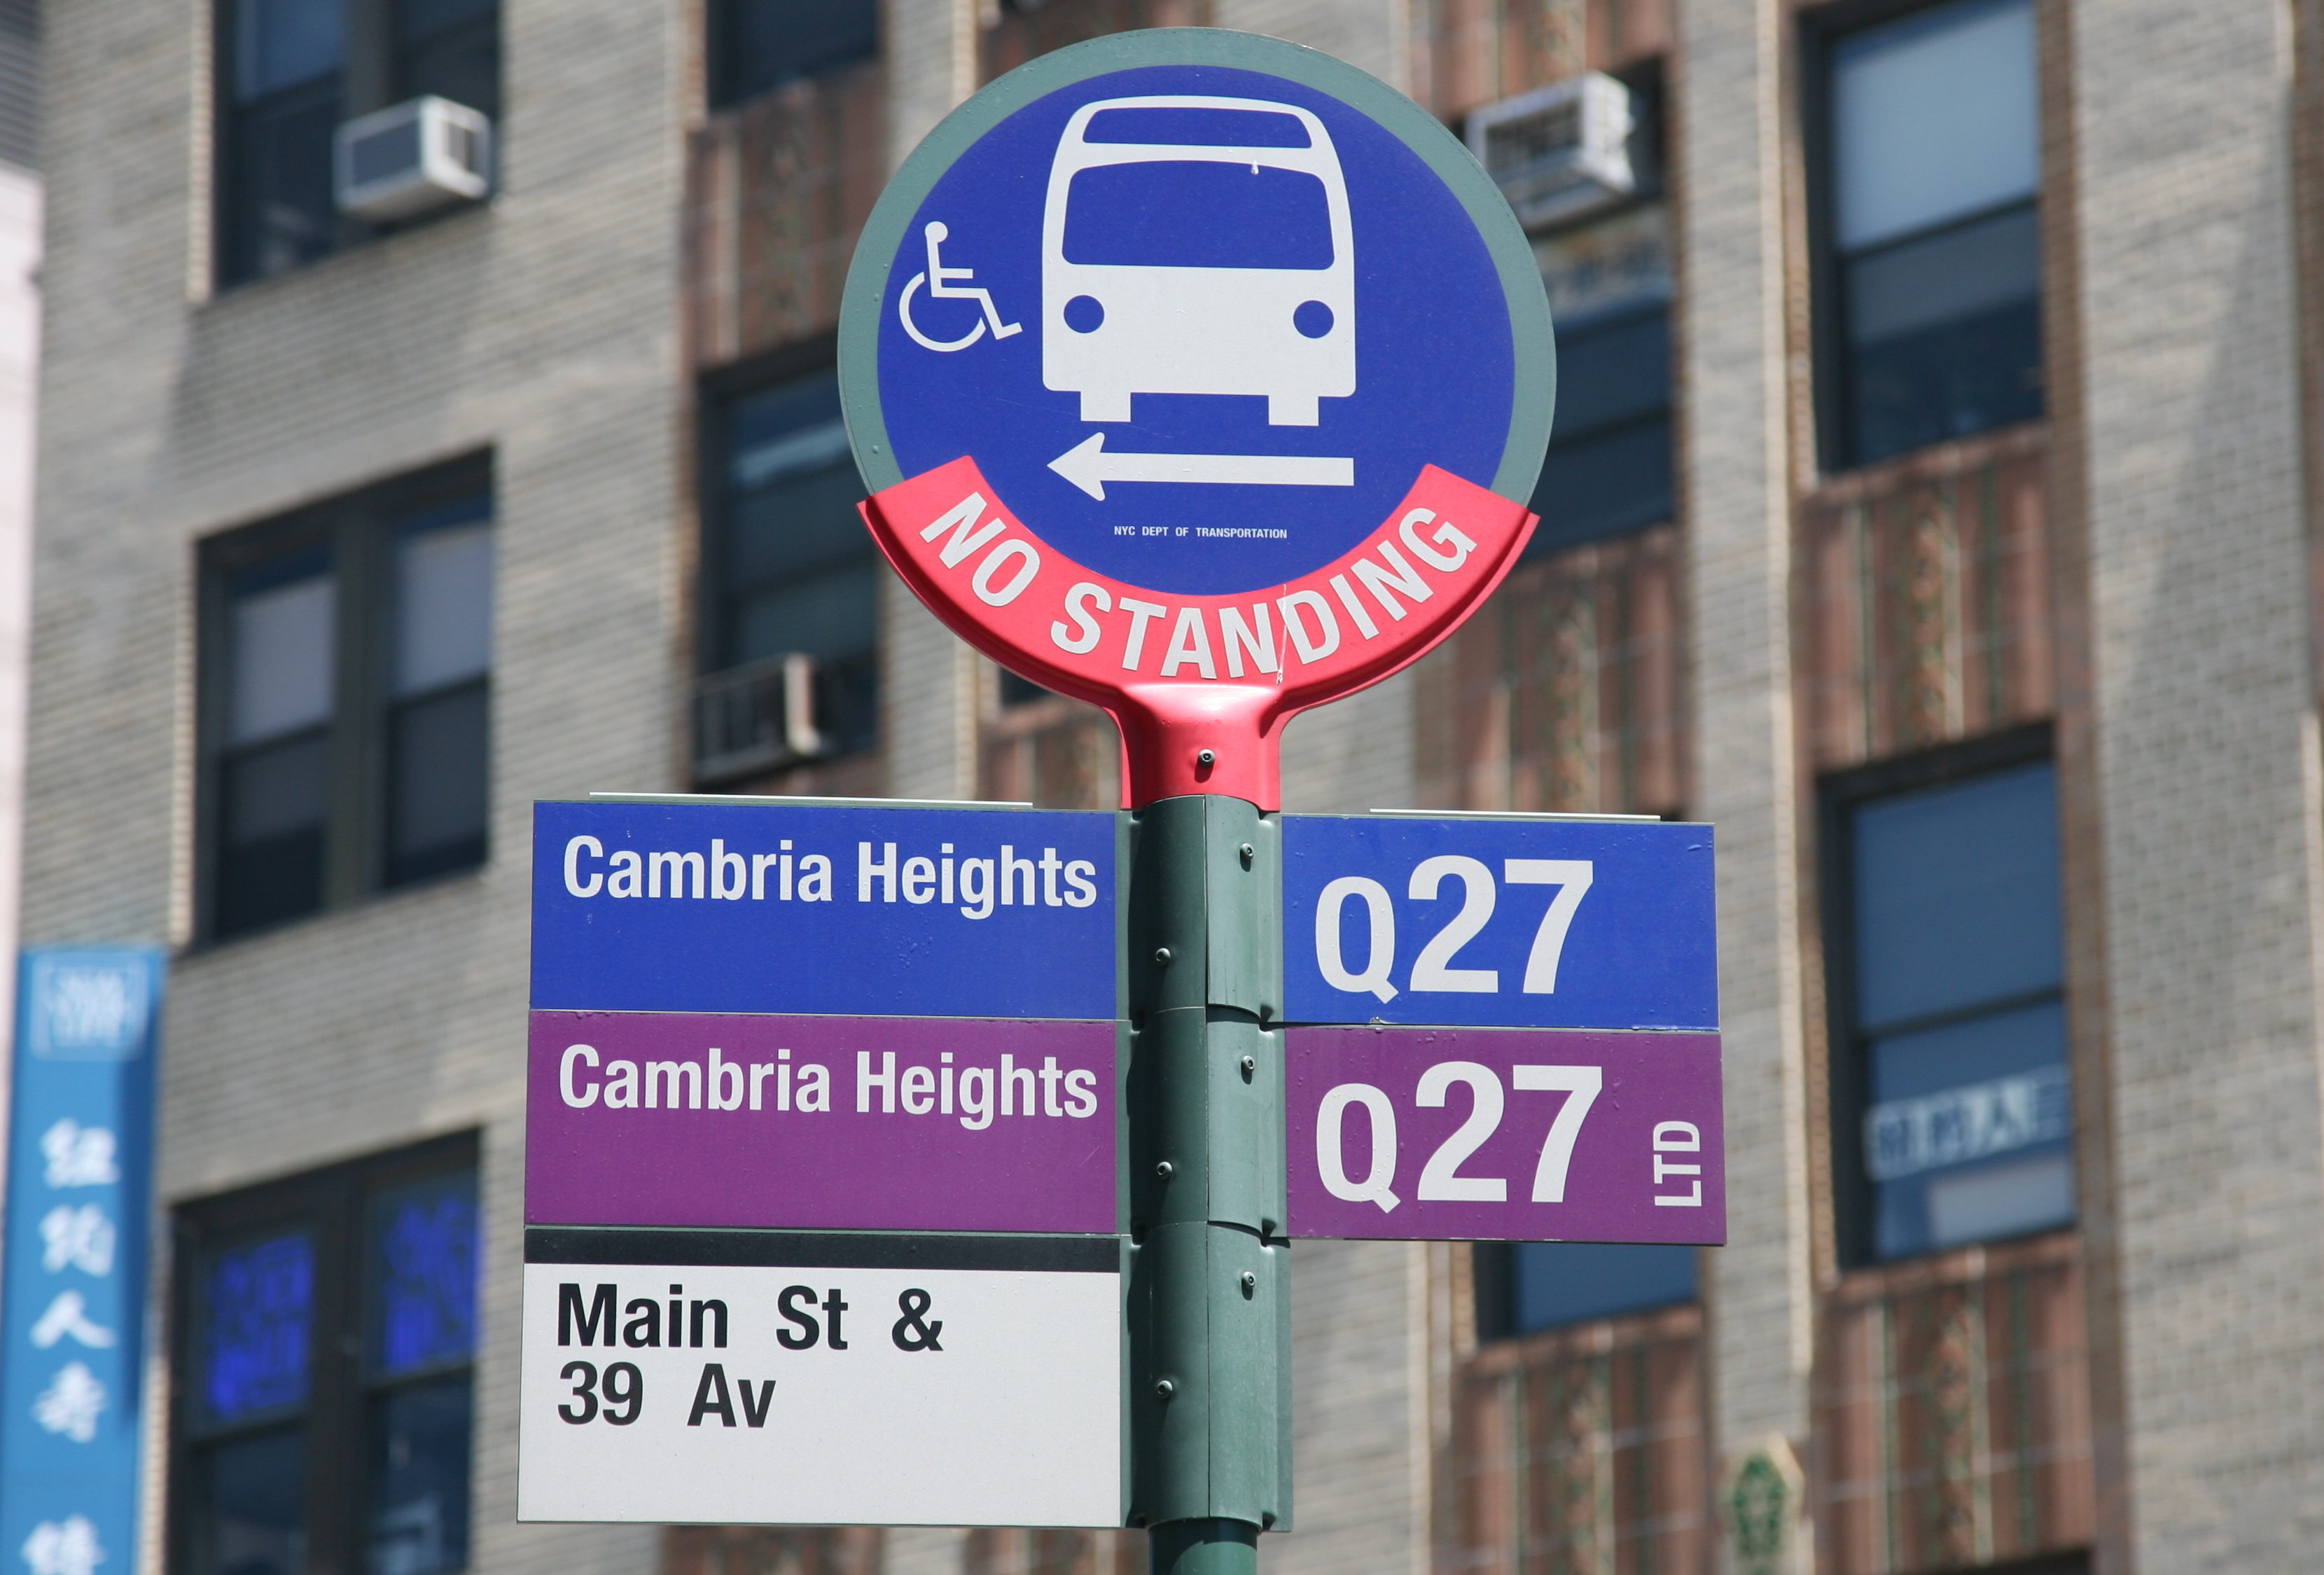 NYC street parking: Bus Stop sign